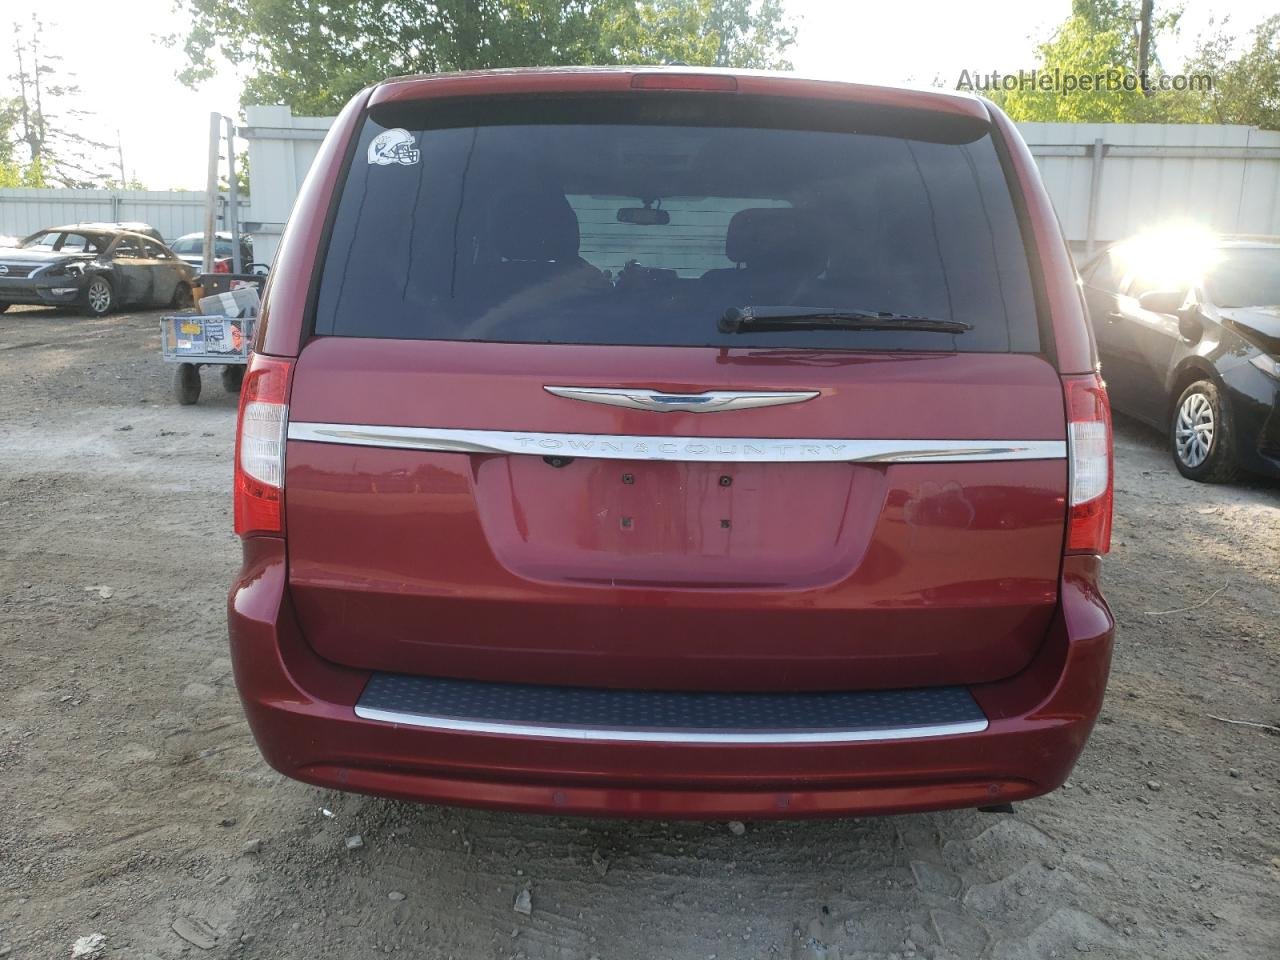 2011 Chrysler Town & Country Touring Red vin: 2A4RR5DGXBR715842